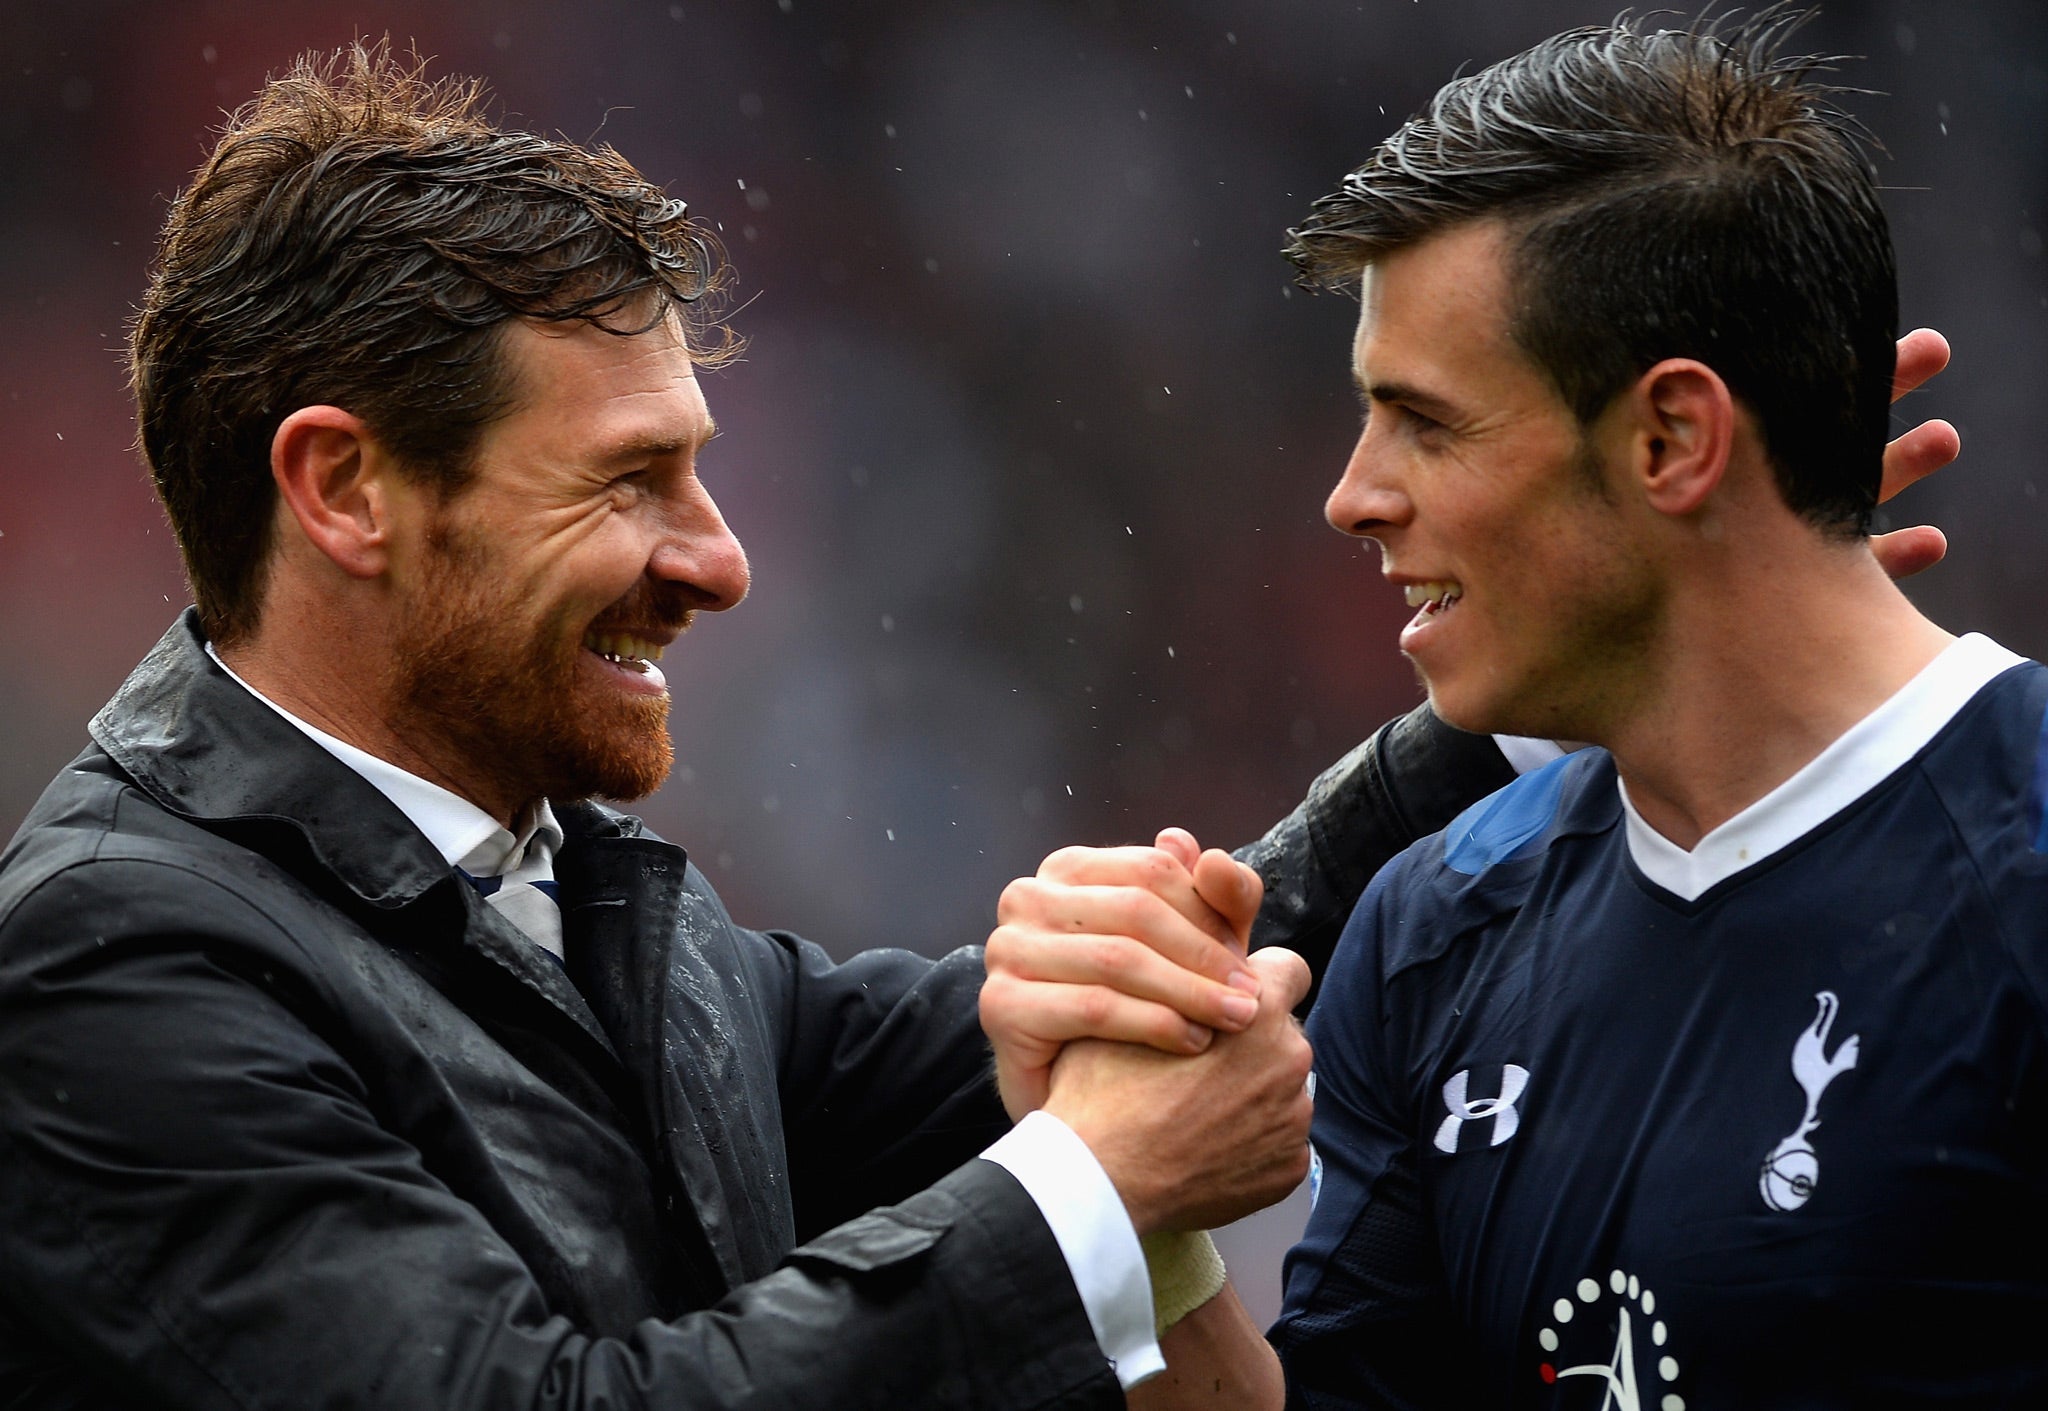 Andre Villas-Boas and Gareth Bale celebrate together but just how long will they both remain at Tottenham?